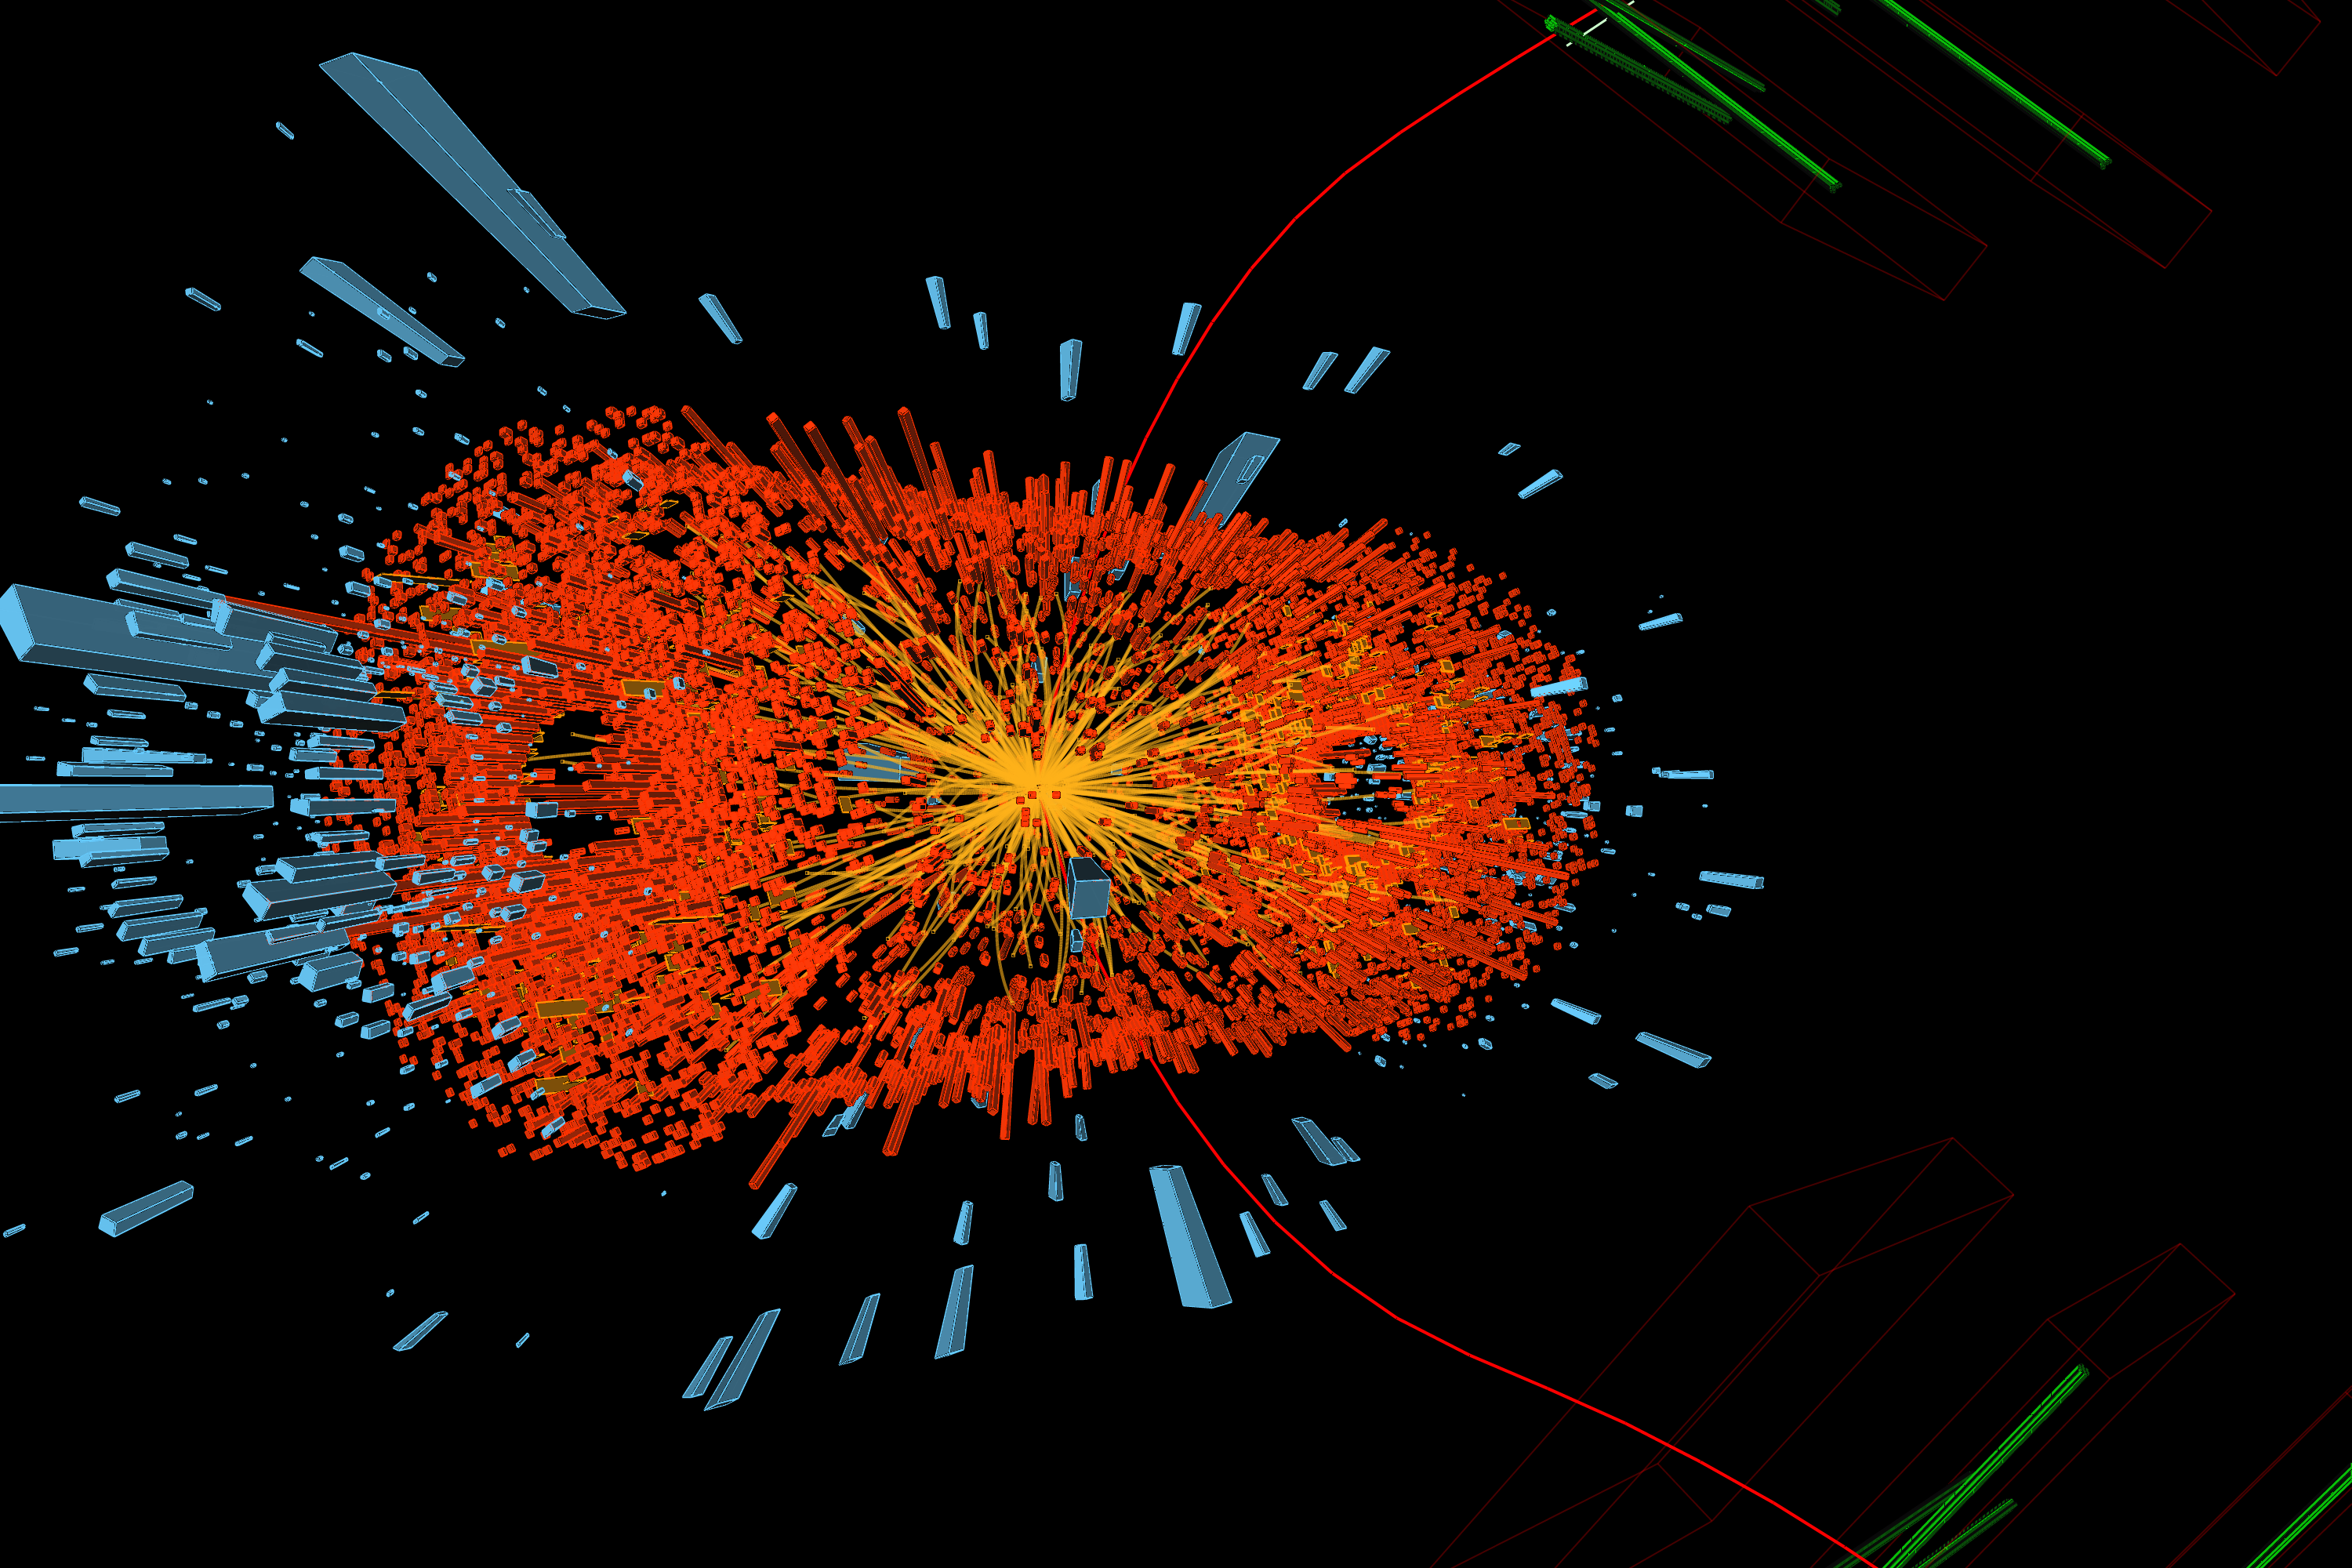 Candidate &Upsilon; decay to two muons observed in a lead-lead collision at the LHC. The two red lines (tracks) are the two muons, the mass of orange lines are tracks from other particles produced in the collision, whose energy is measured in the electromagnetic calorimeter (red cuboids) and the hadron calorimeter (blue cuboids).